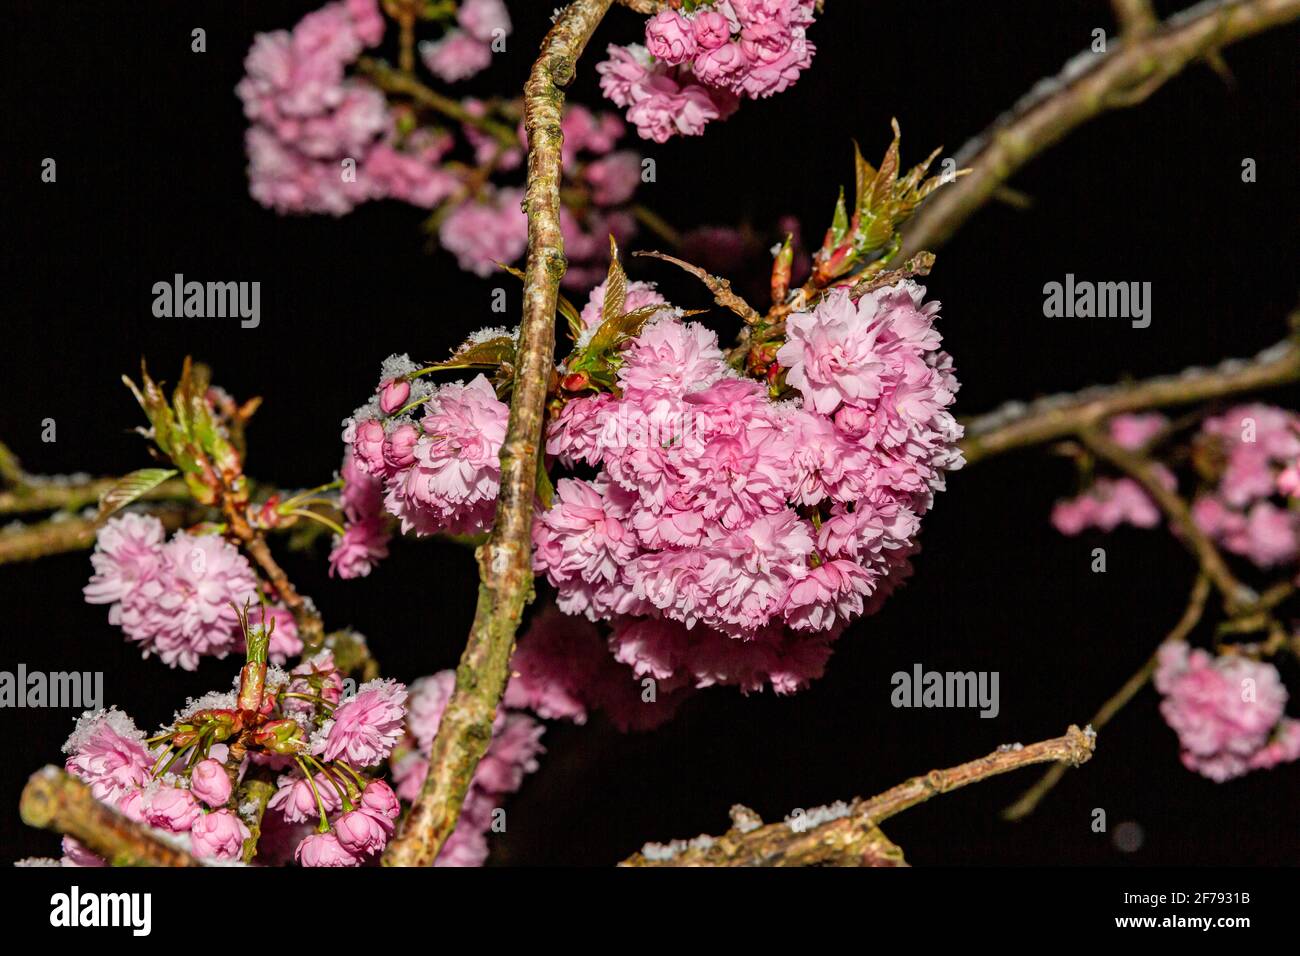 Belfast, UK. 06th Apr, 2021. Snow Fall On Cherry blossom tree in Spring. A unexpected cold front moved down over Northern parts of the UK brought patchy snow showers in Belfast Credit: Bonzo/Alamy Live News Stock Photo